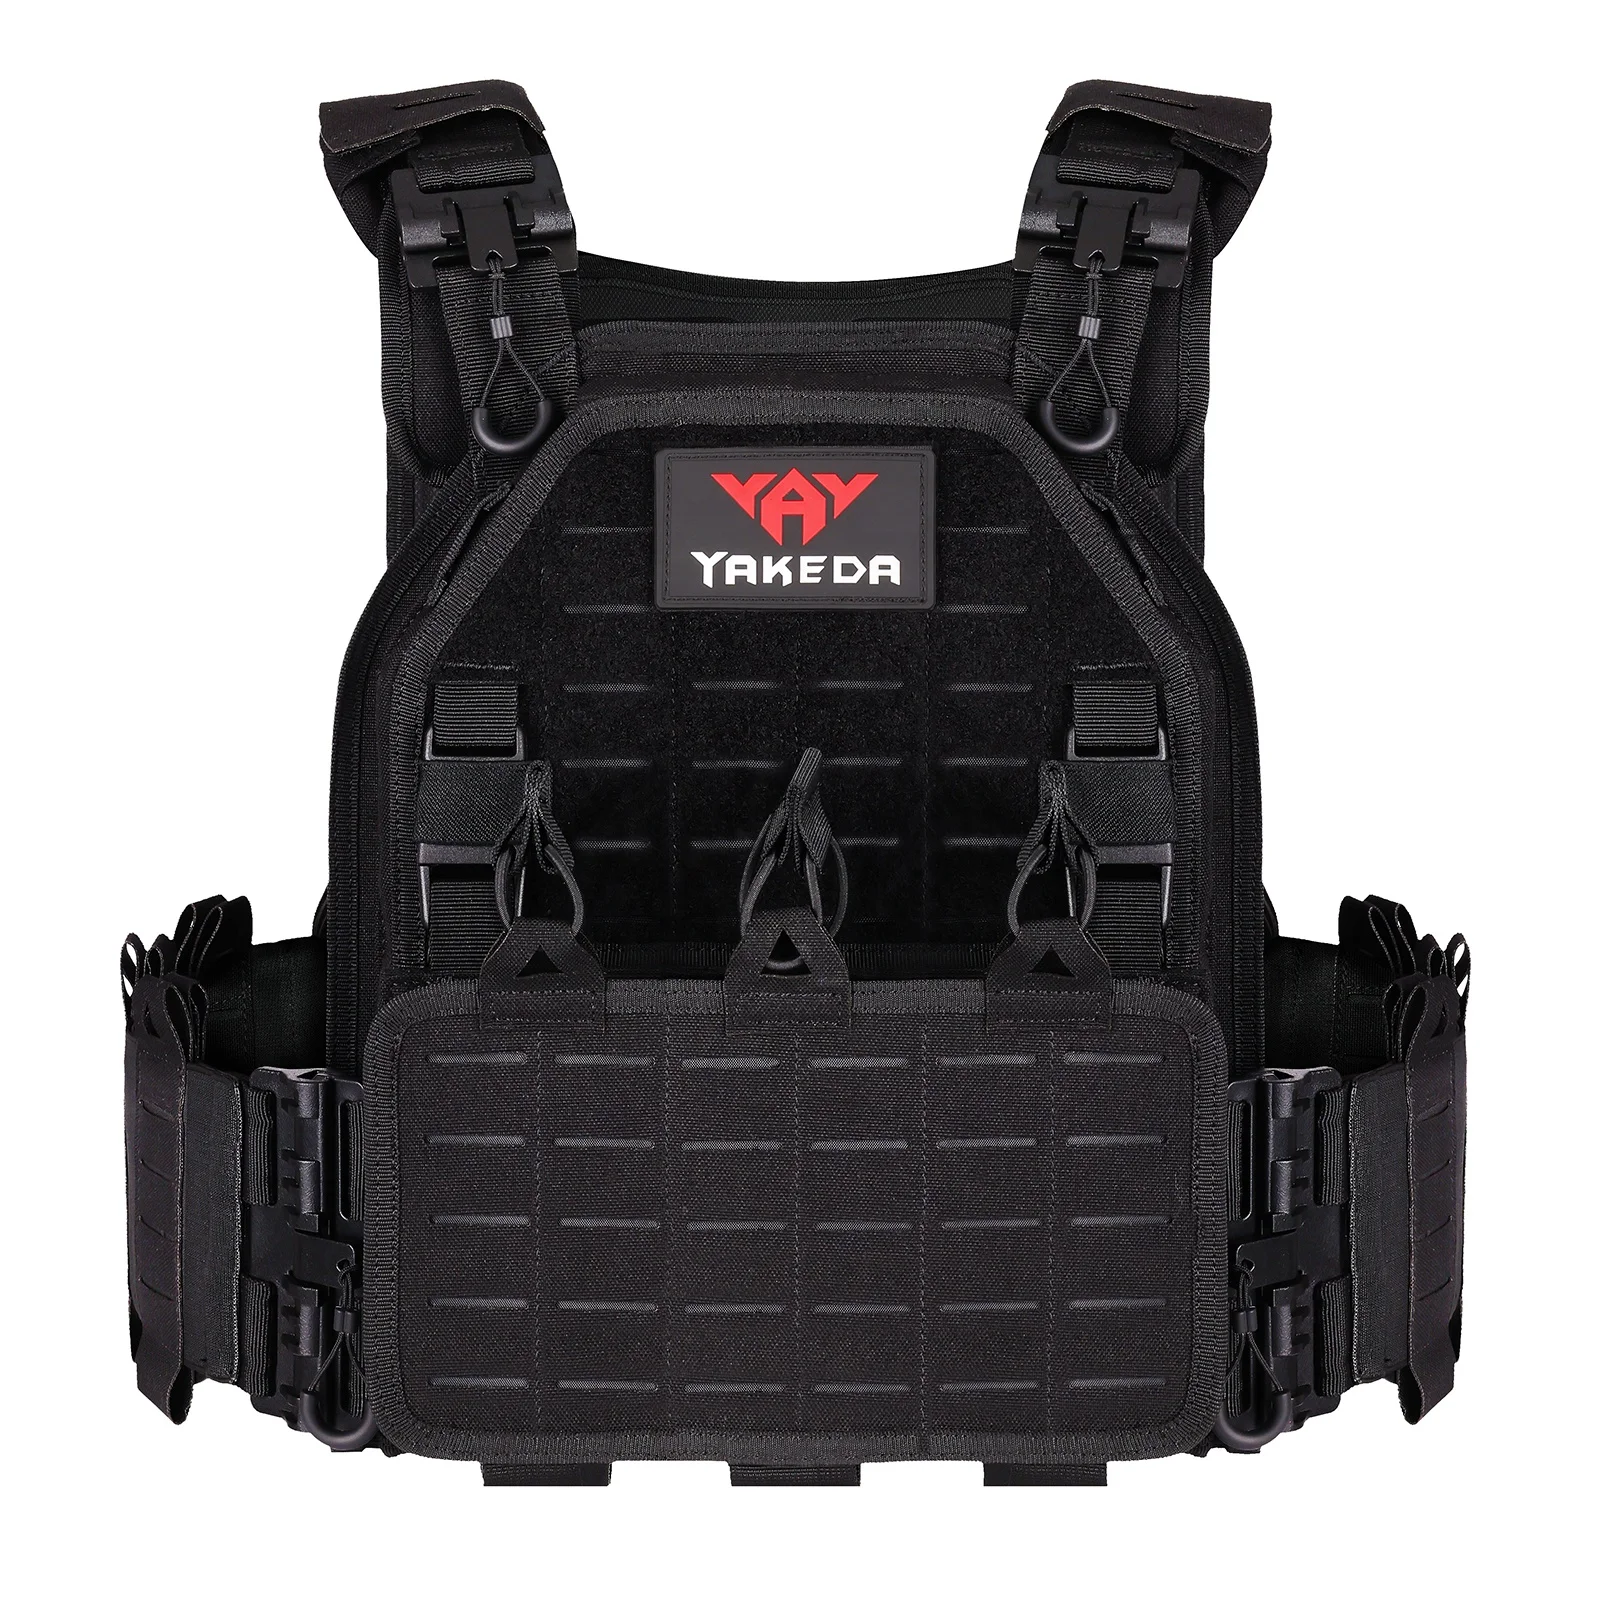 YAKEDA Light Weight Quick Release SWAT Combat Plate Carrier 1000D Nylon Molle Chaleco Tactico Military Tactical Vest